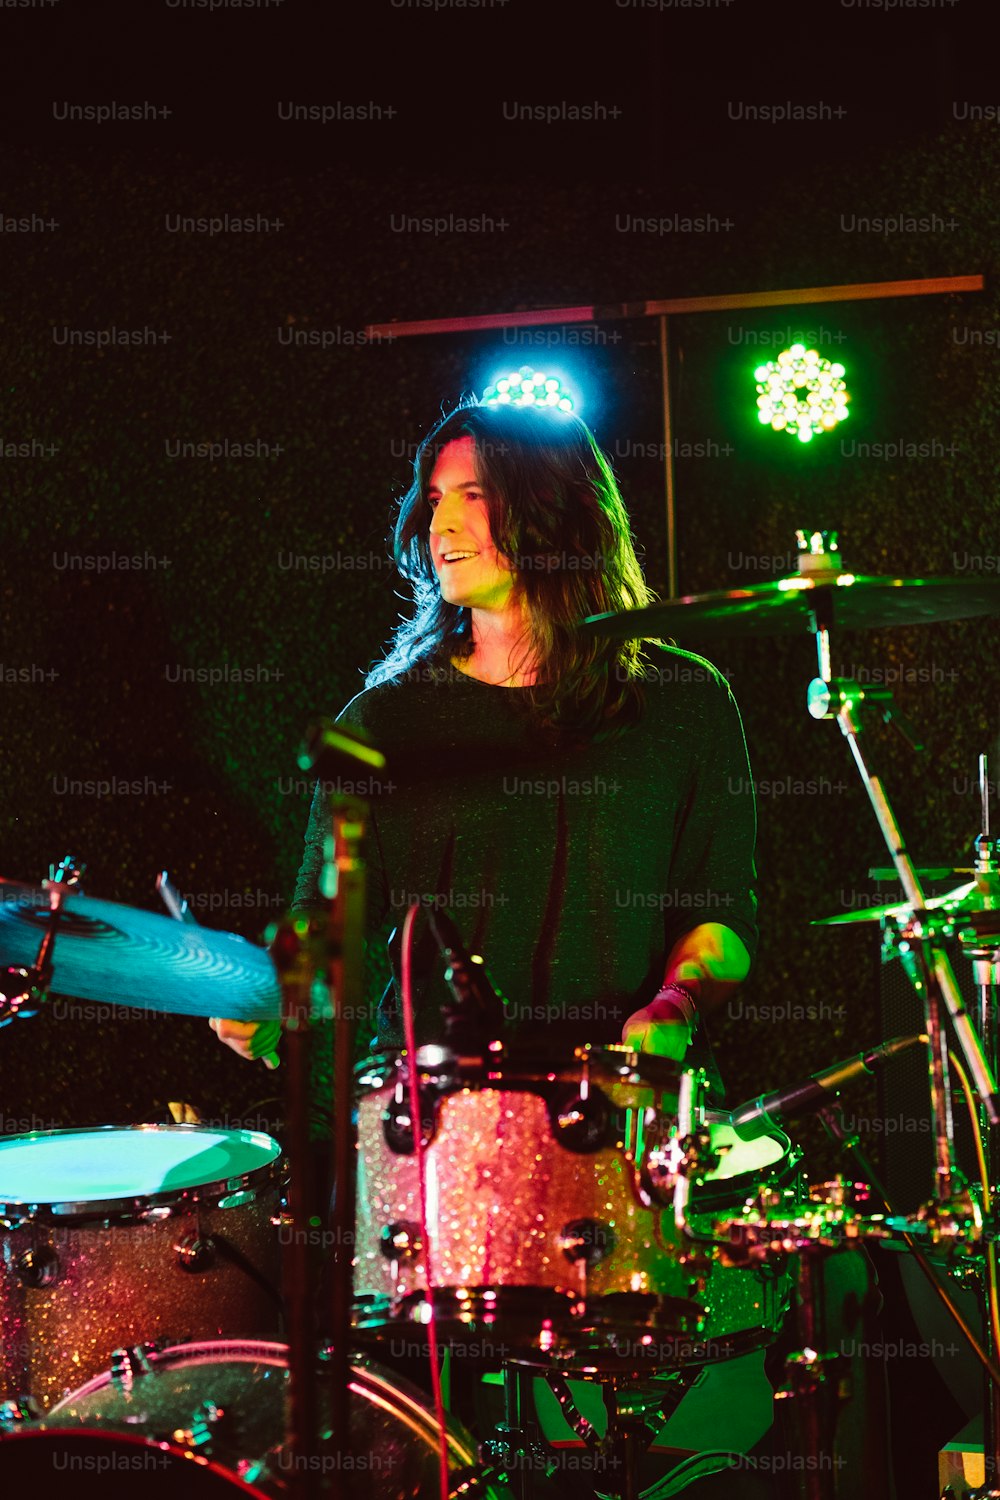 a man with long hair playing drums in a dark room